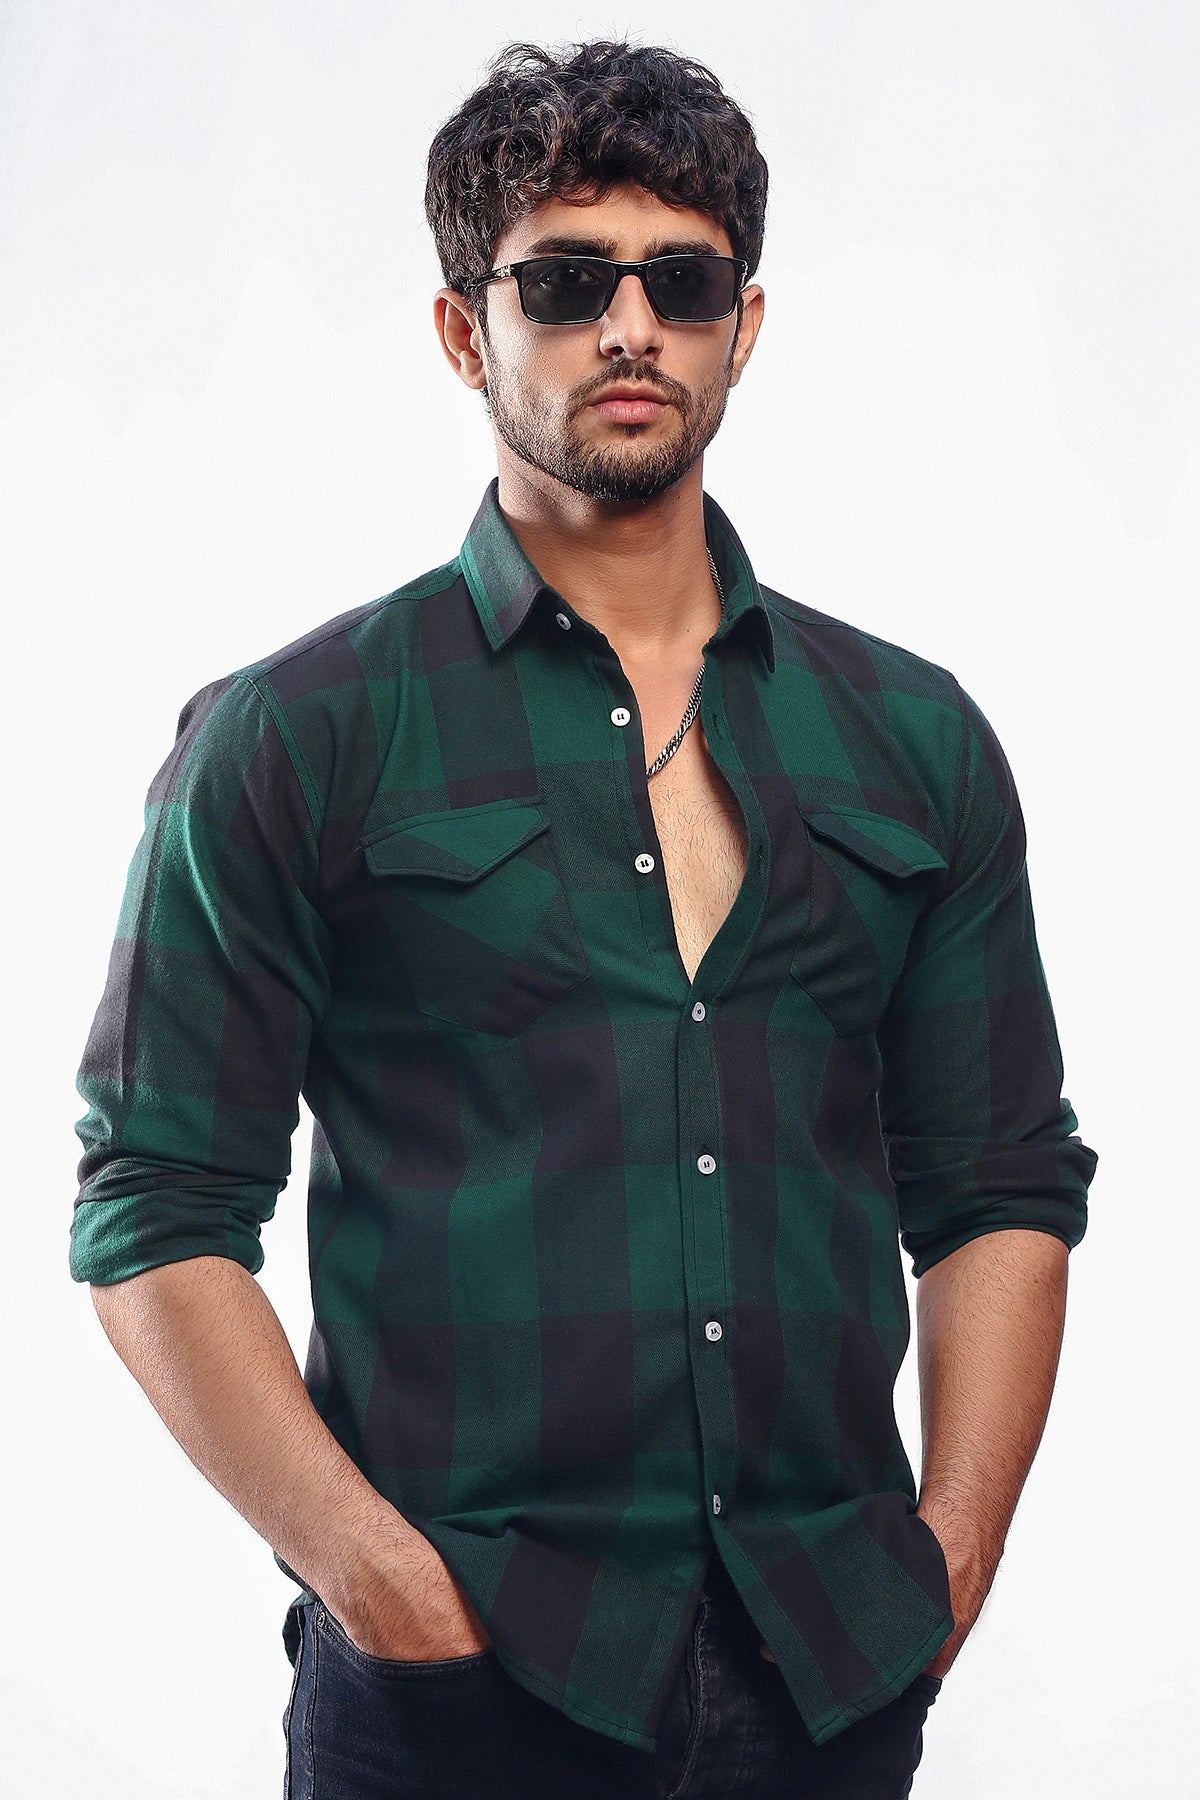 Flannel in Dark Green and Black